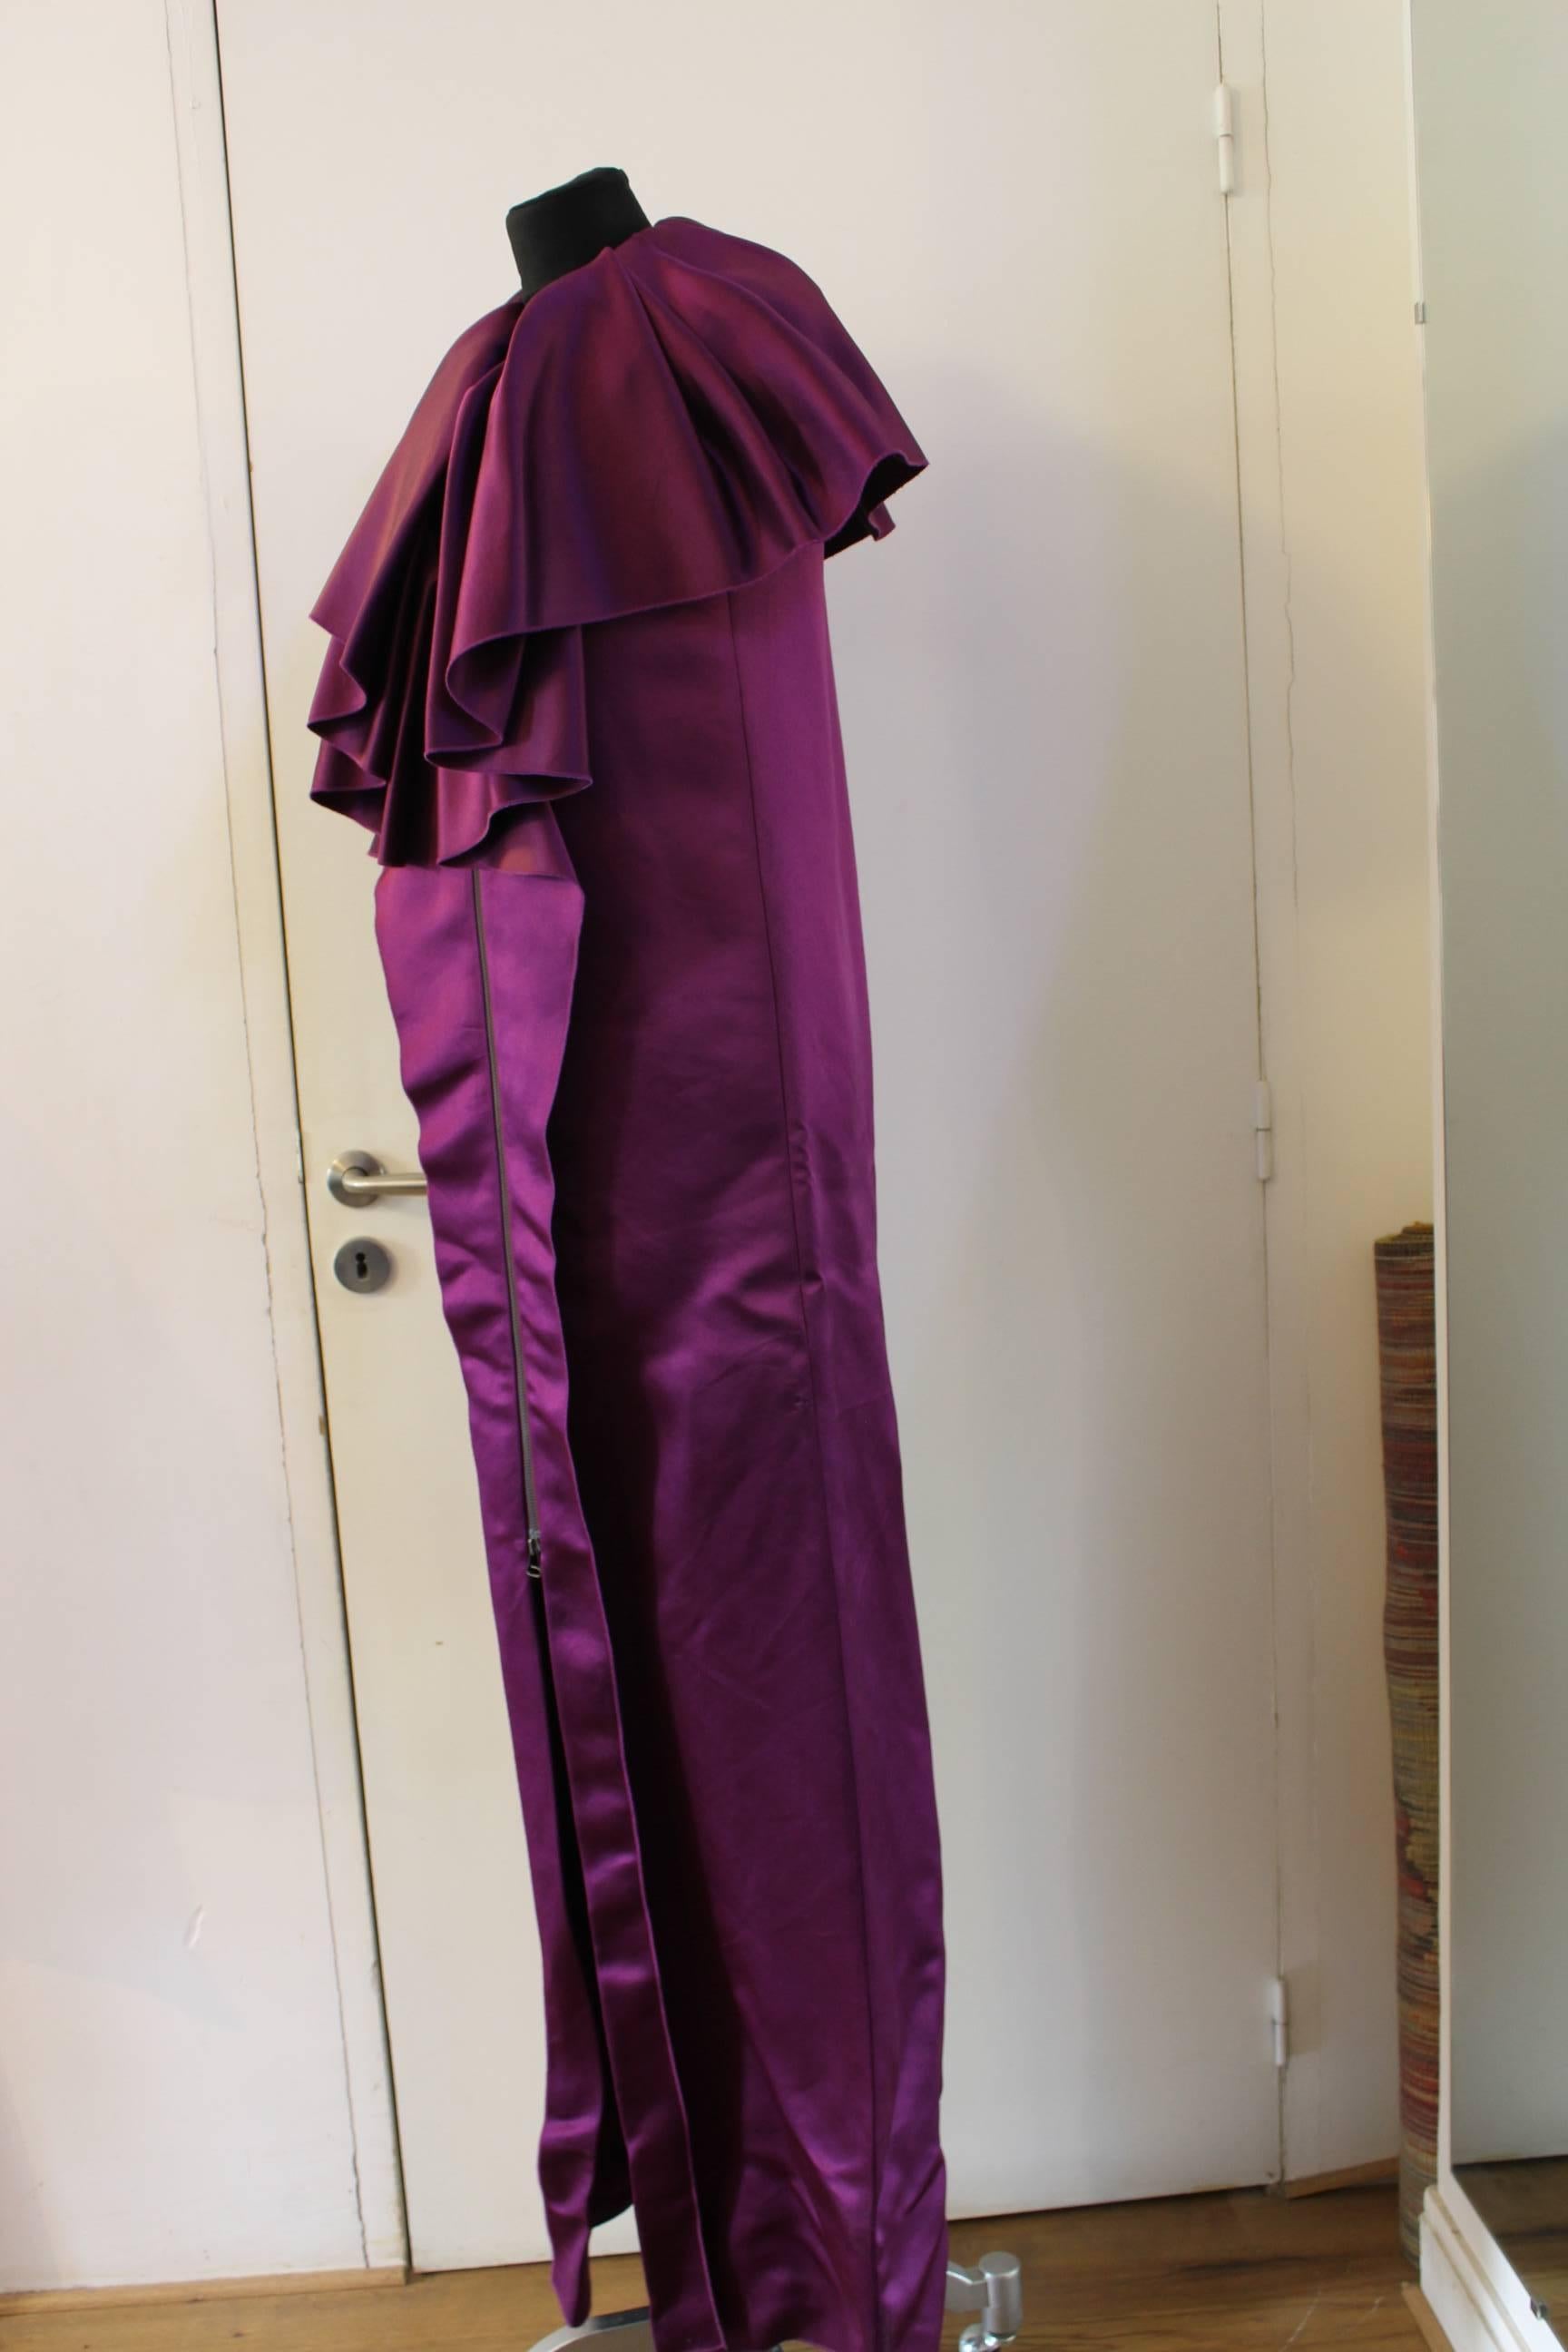 new never used super nice Lanvin purple dress.

Size small 38 french

Lenght 155cm